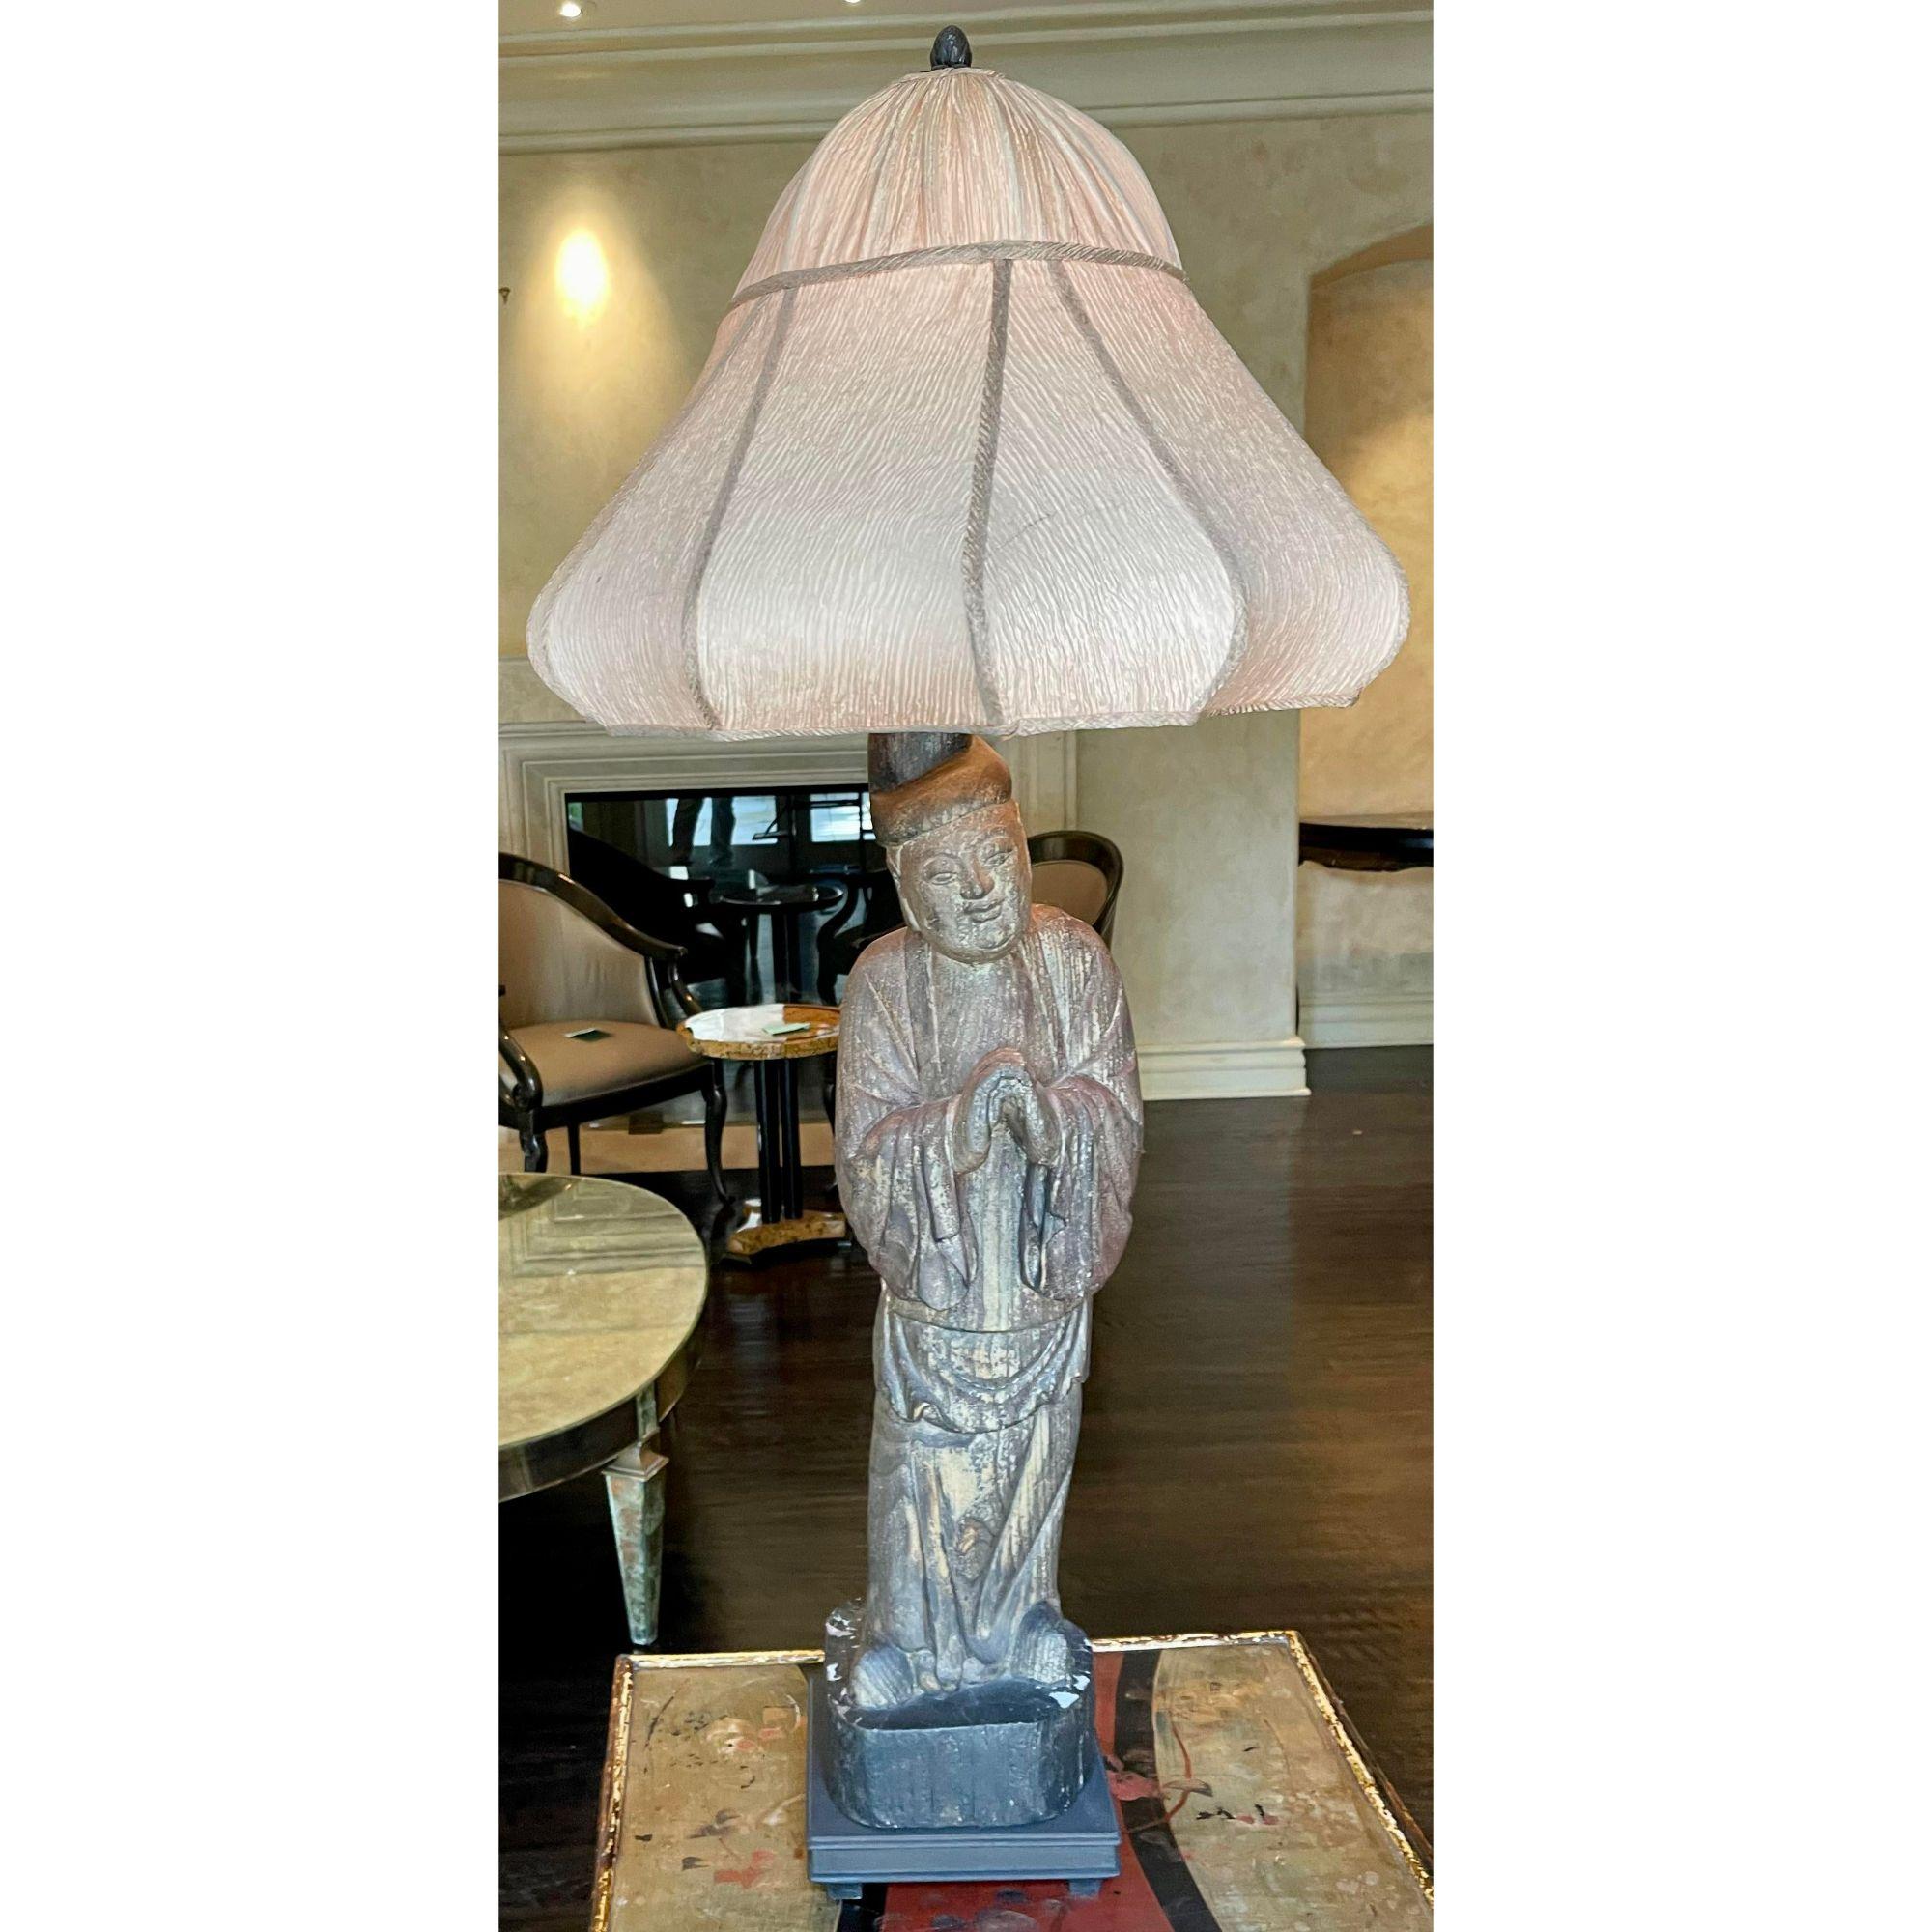 Antique Chinese Carved Buddha Sculpture Now a Designer Lamp. It is beautifully mounted and includes the custom made shade illustrated.

Additional information: 
Materials: Lights, Silk, Wood
Color: Beige
Period: 19th Century 
Styles: Chinese,